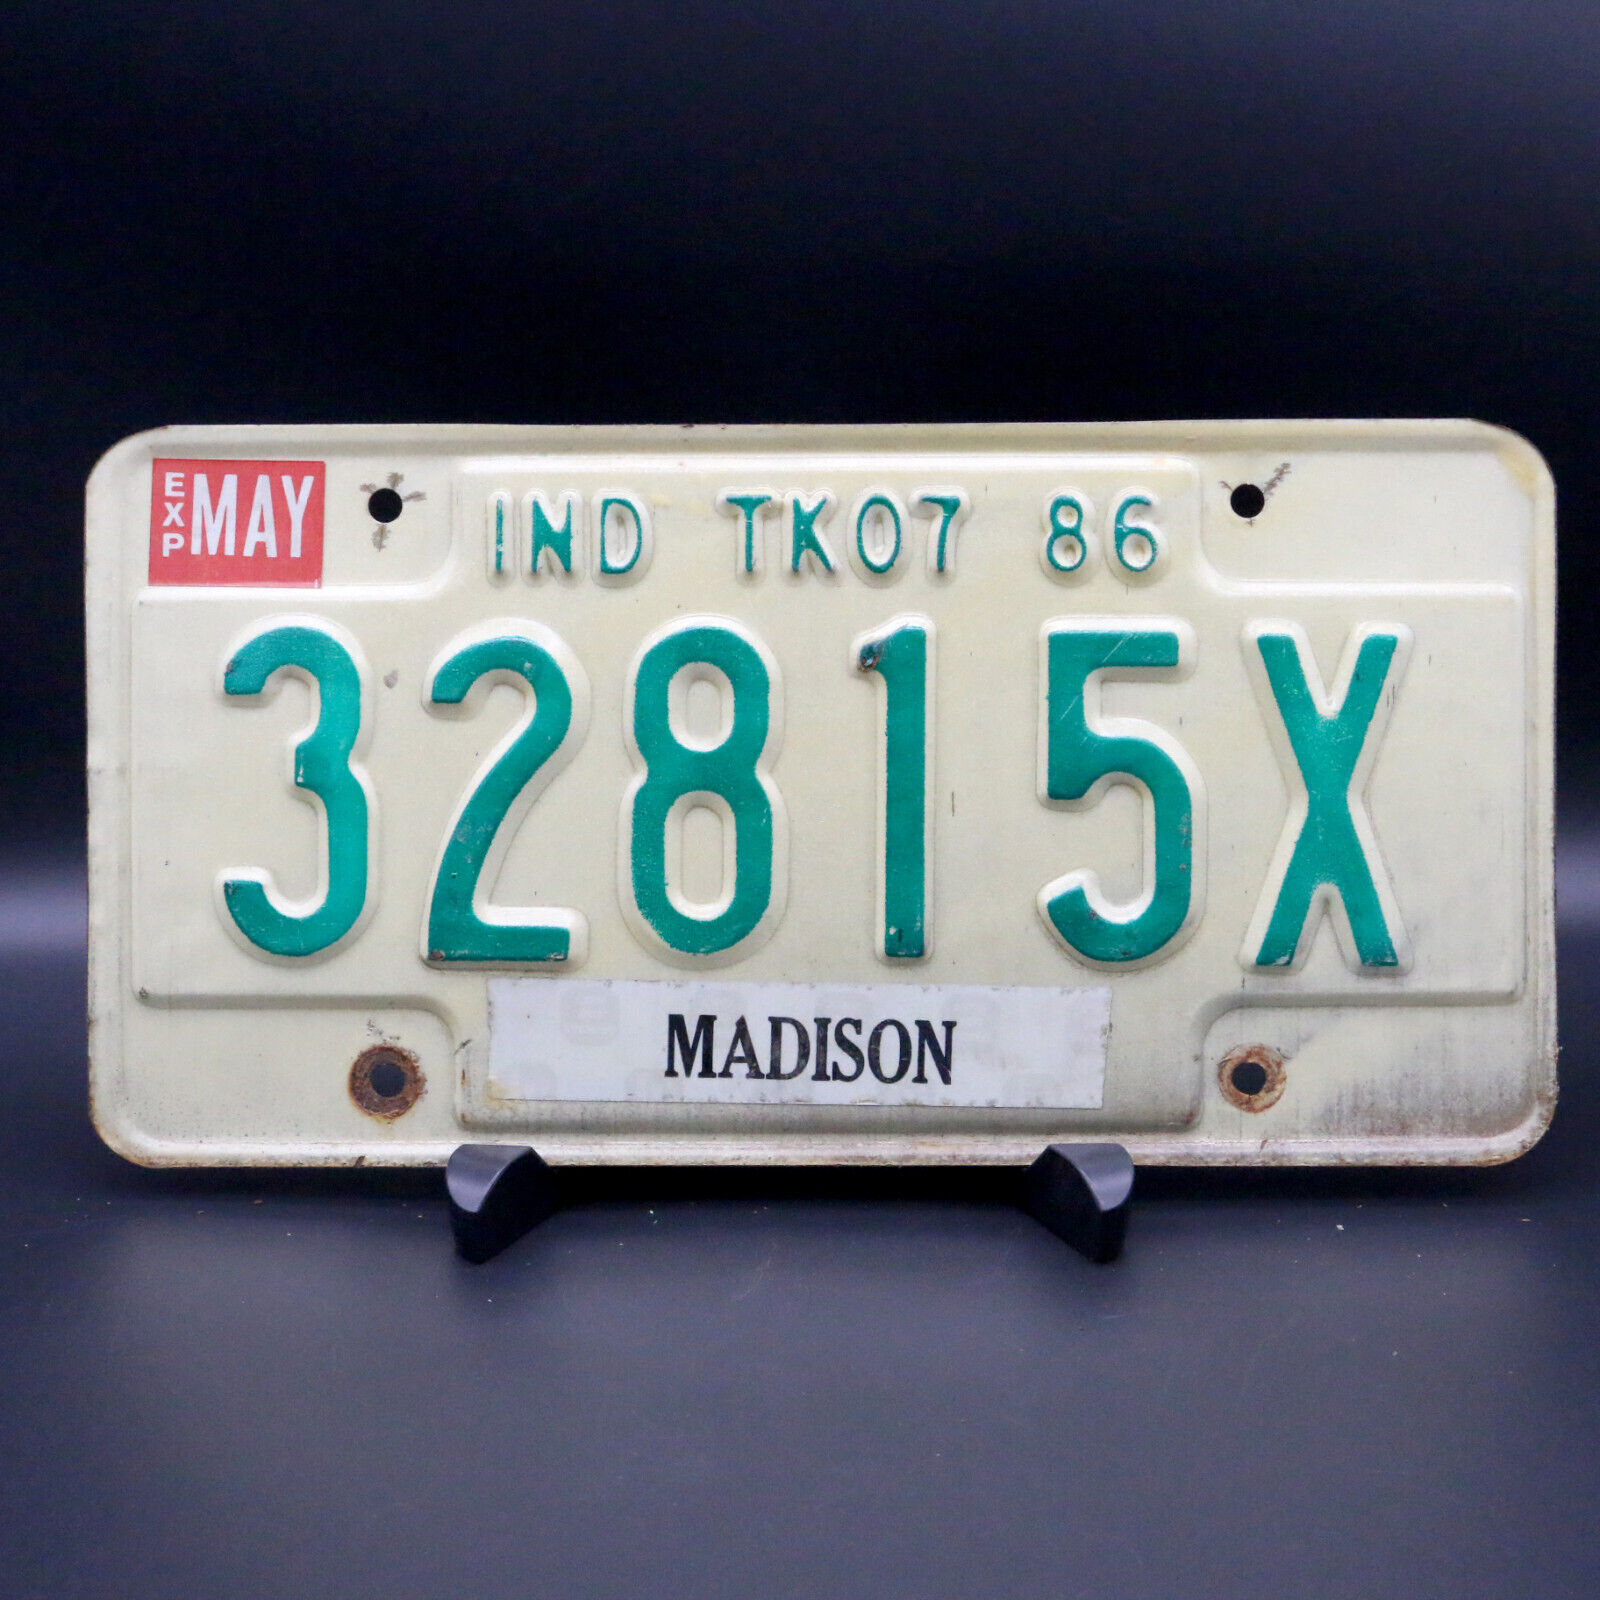 1986 Indiana 32815X - TK07 Madison Co License Plate Expired Car Tag White Black